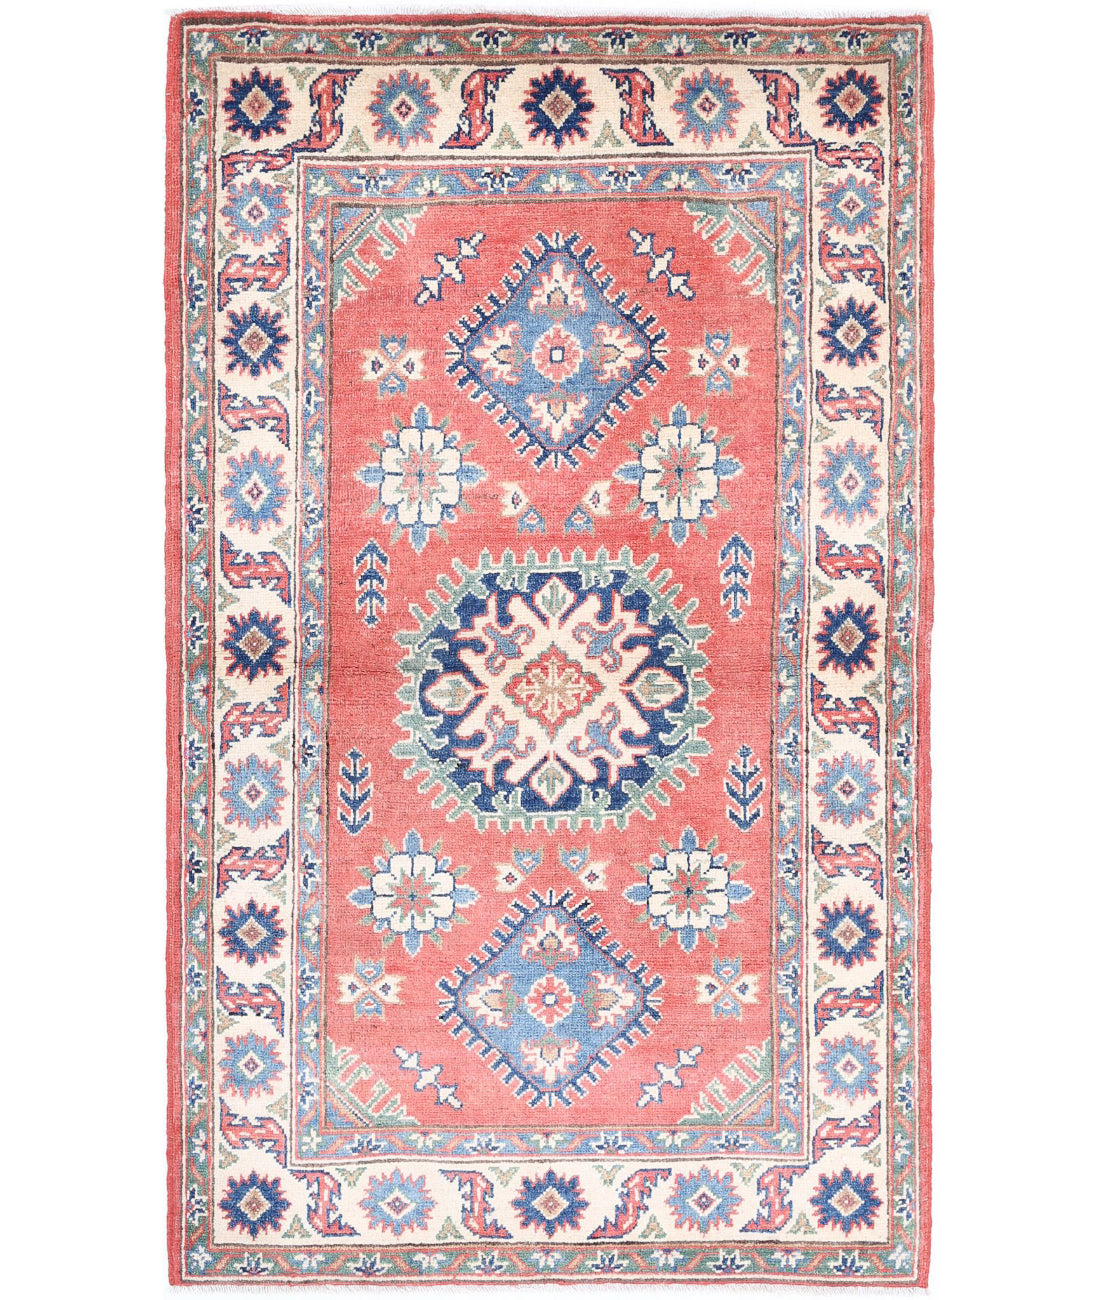 Hand Knotted Tribal Kazak Wool Rug - 3'1'' x 5'2'' 3'1'' x 5'2'' (93 X 155) / Red / Ivory